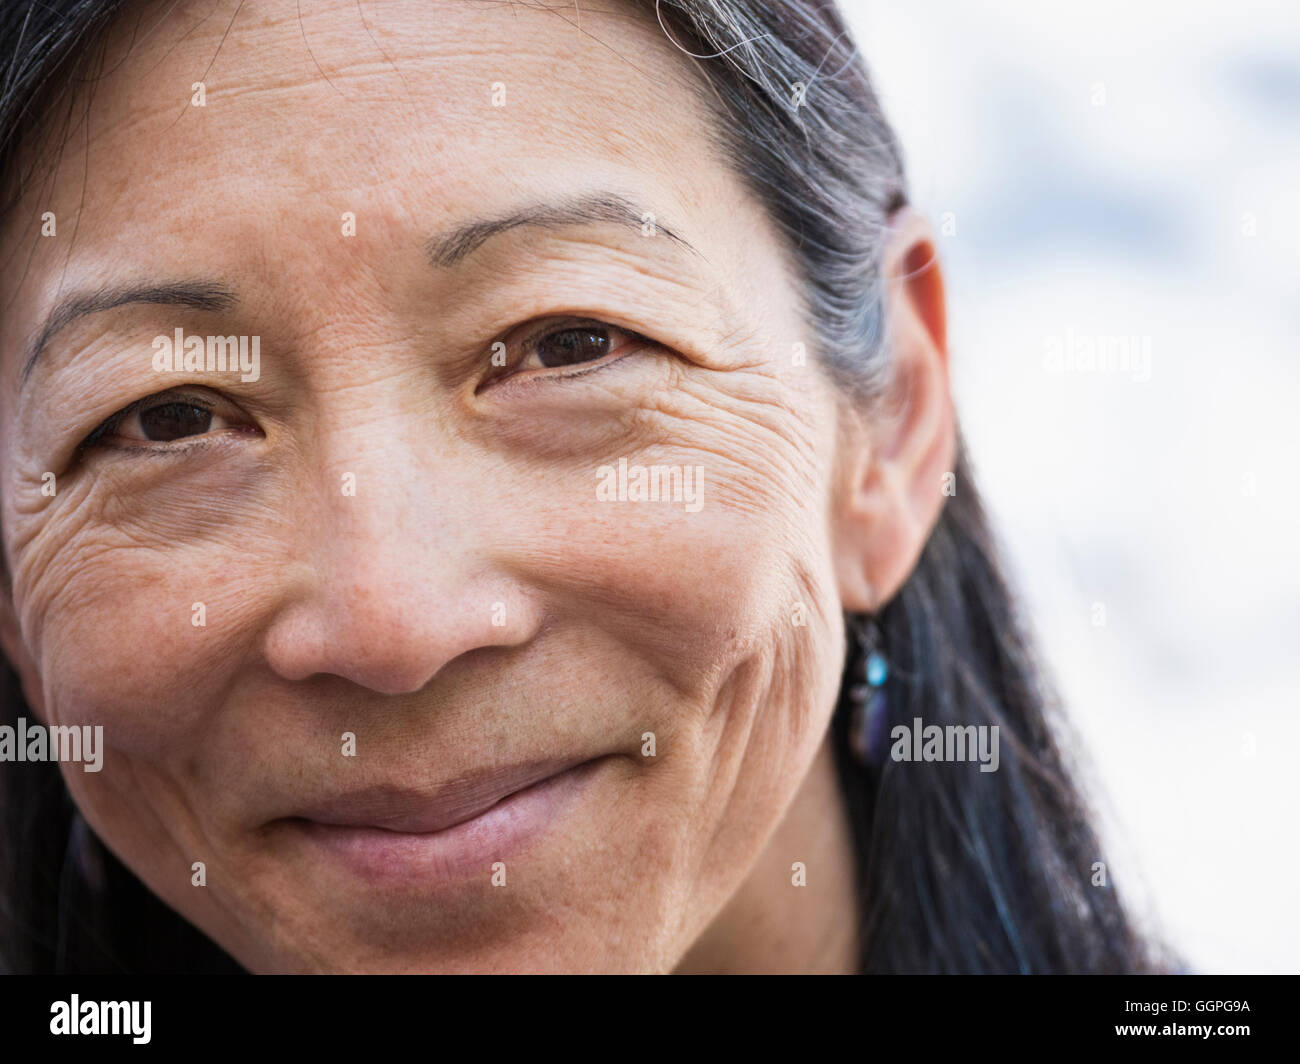 Close up of face of smiling Japanese woman Stock Photo